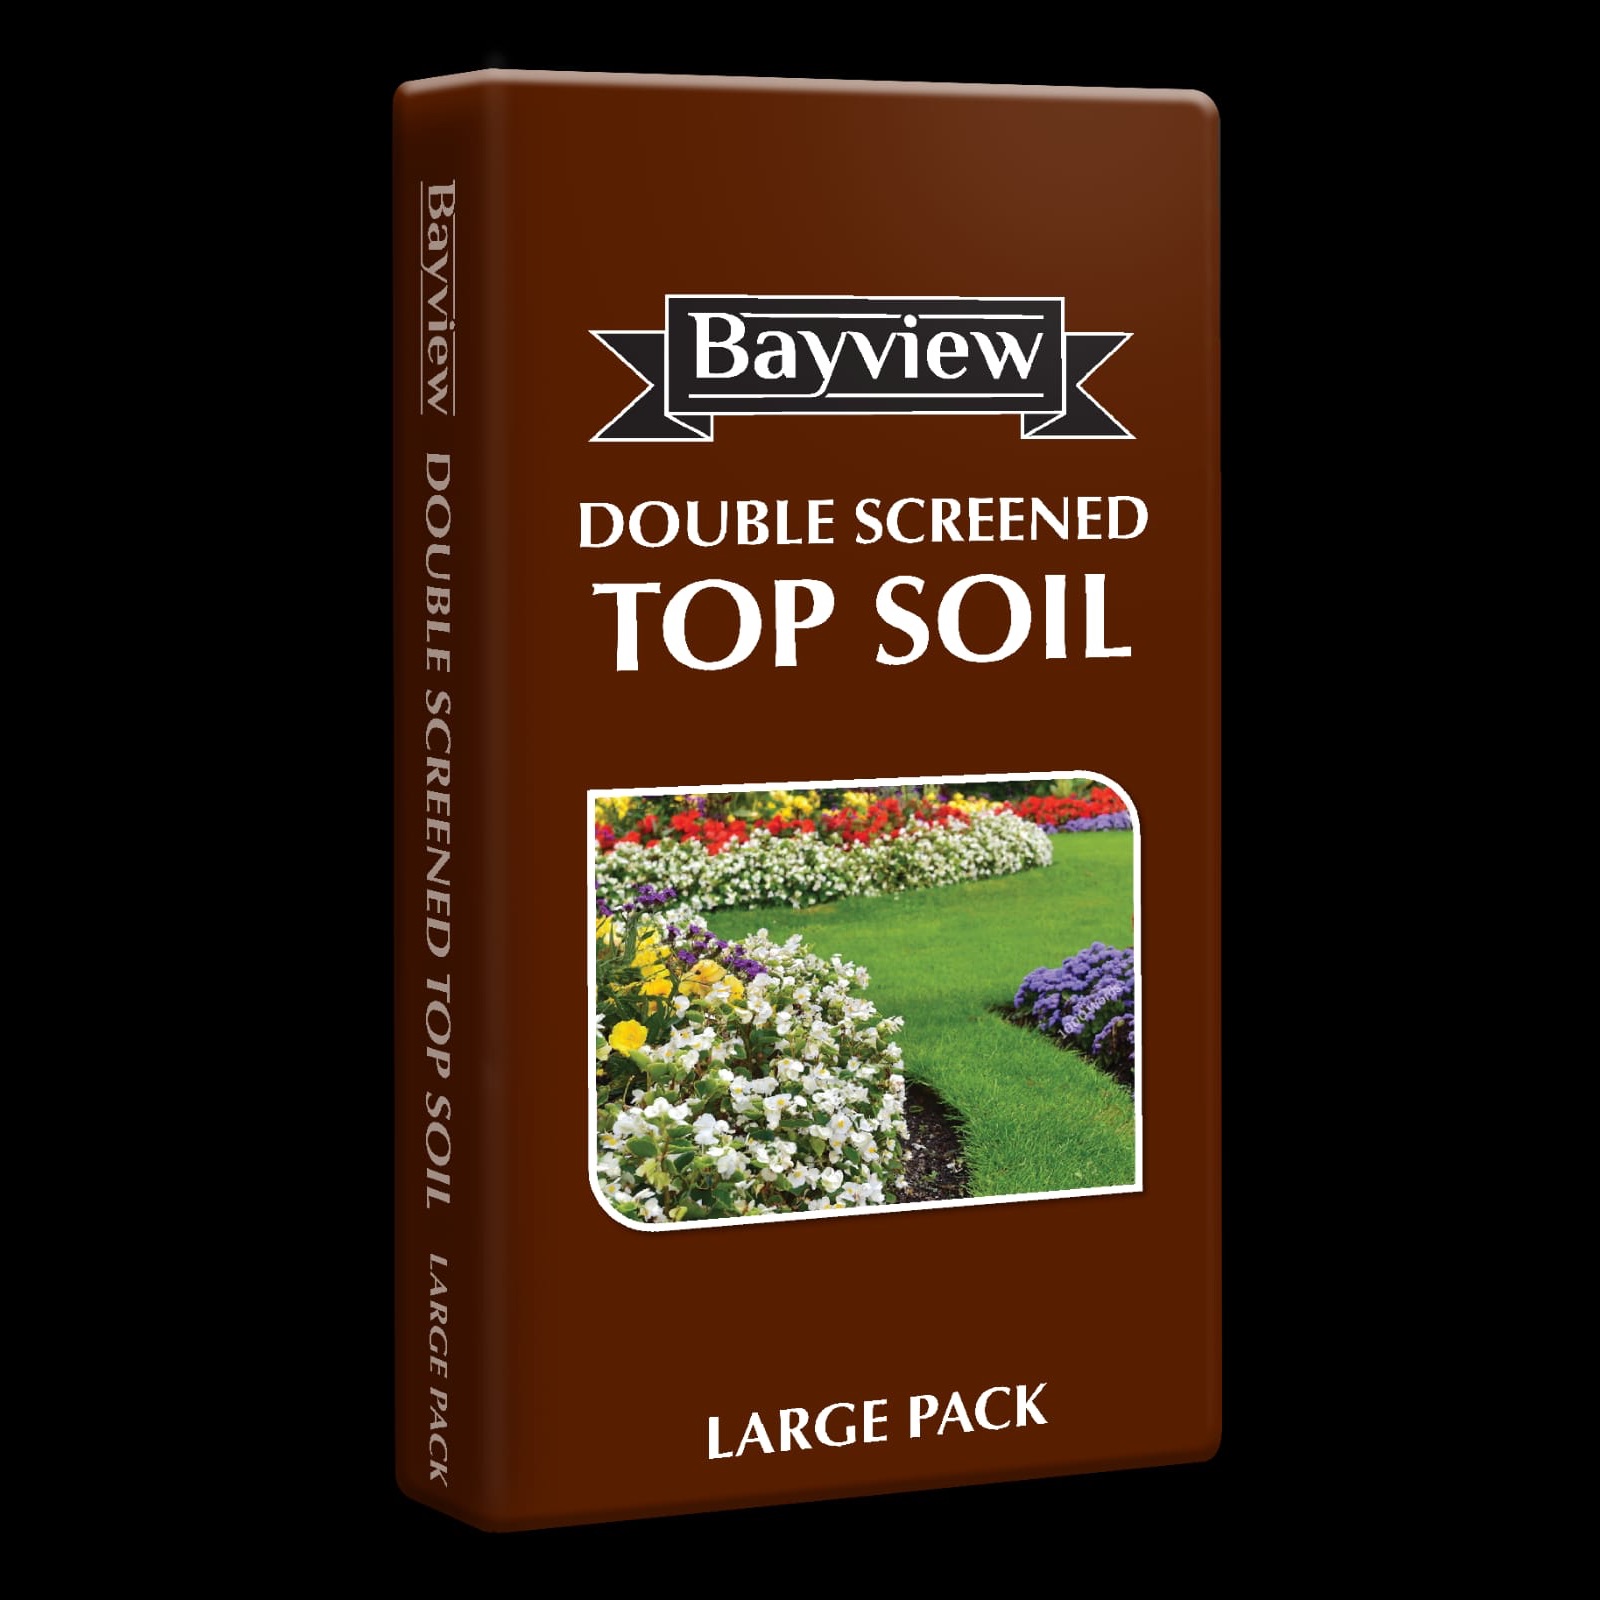 Bayview Double Screened Top Soil Large